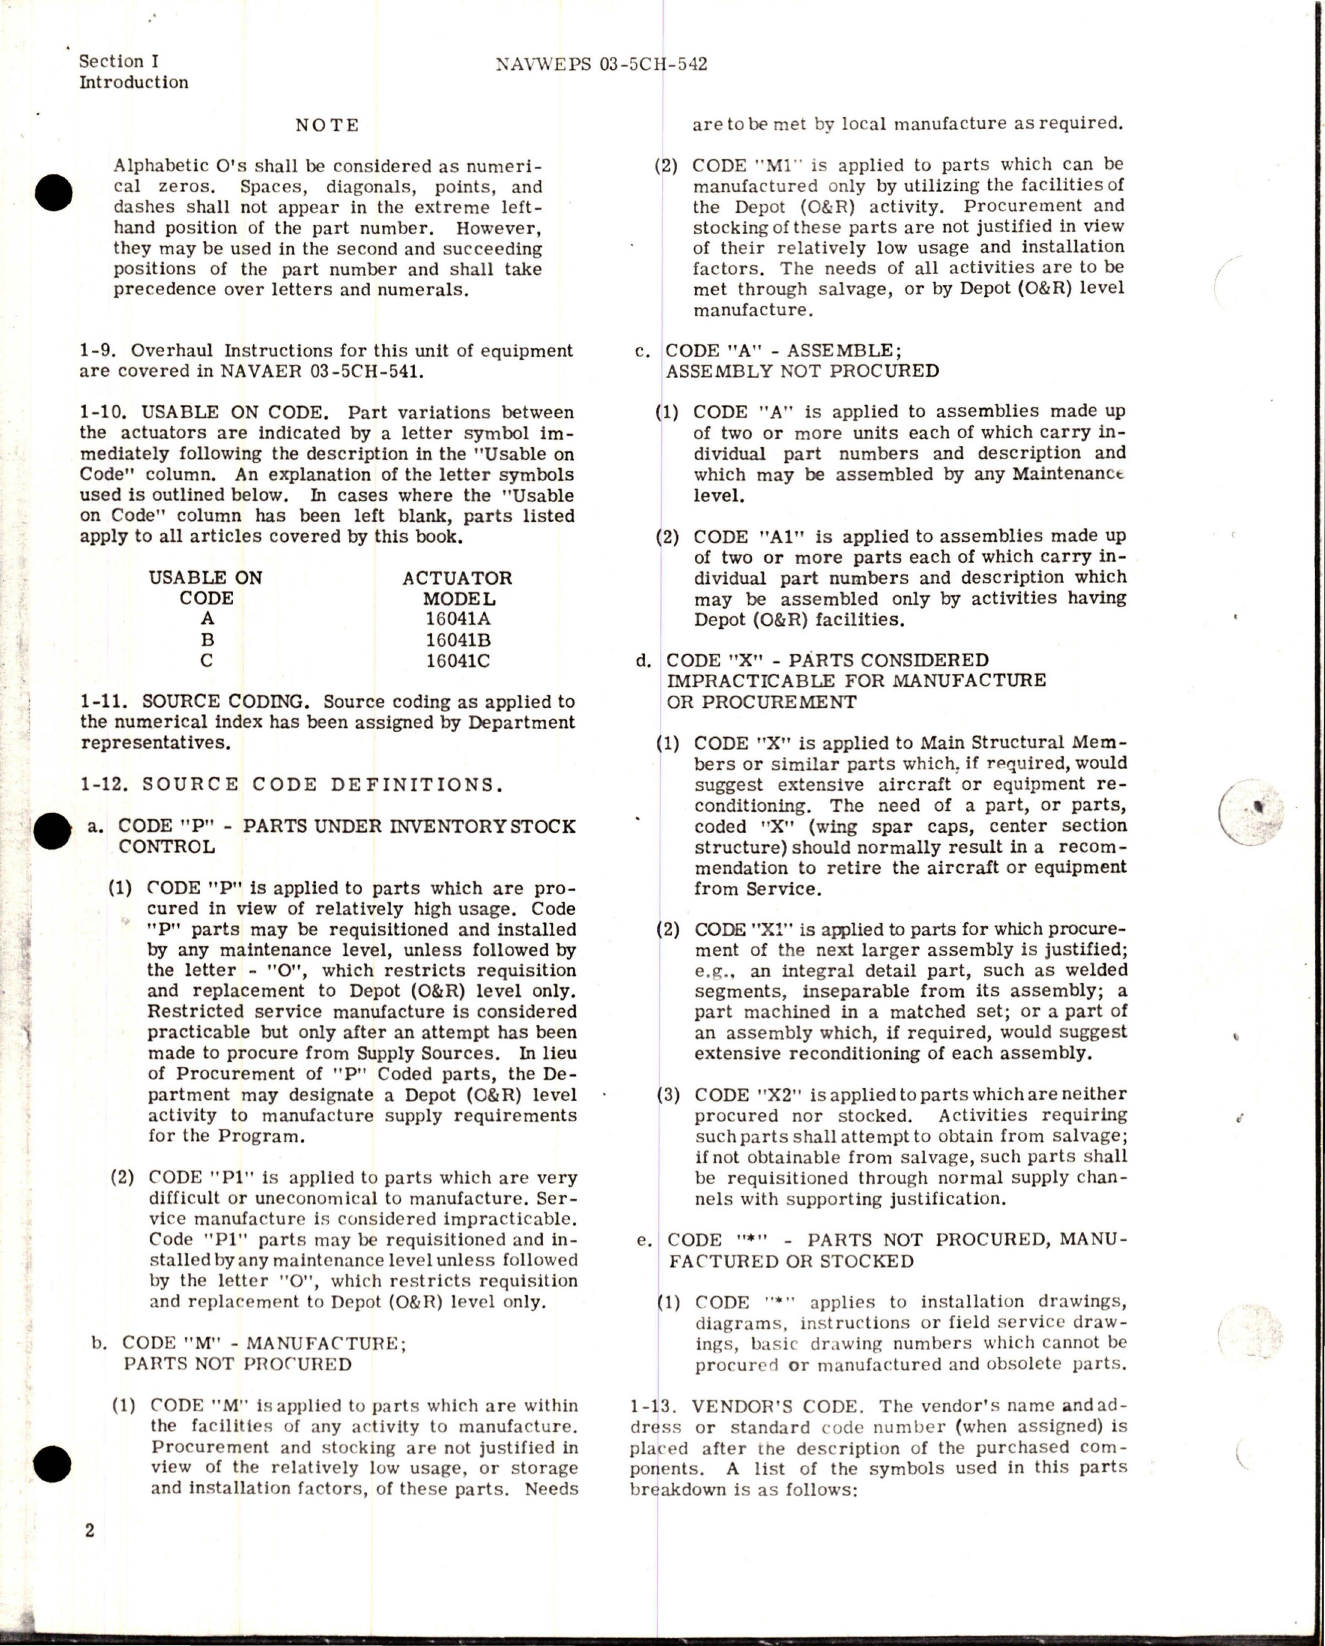 Sample page 5 from AirCorps Library document: Illustrated Parts Breakdown for Rudder Trim Actuator